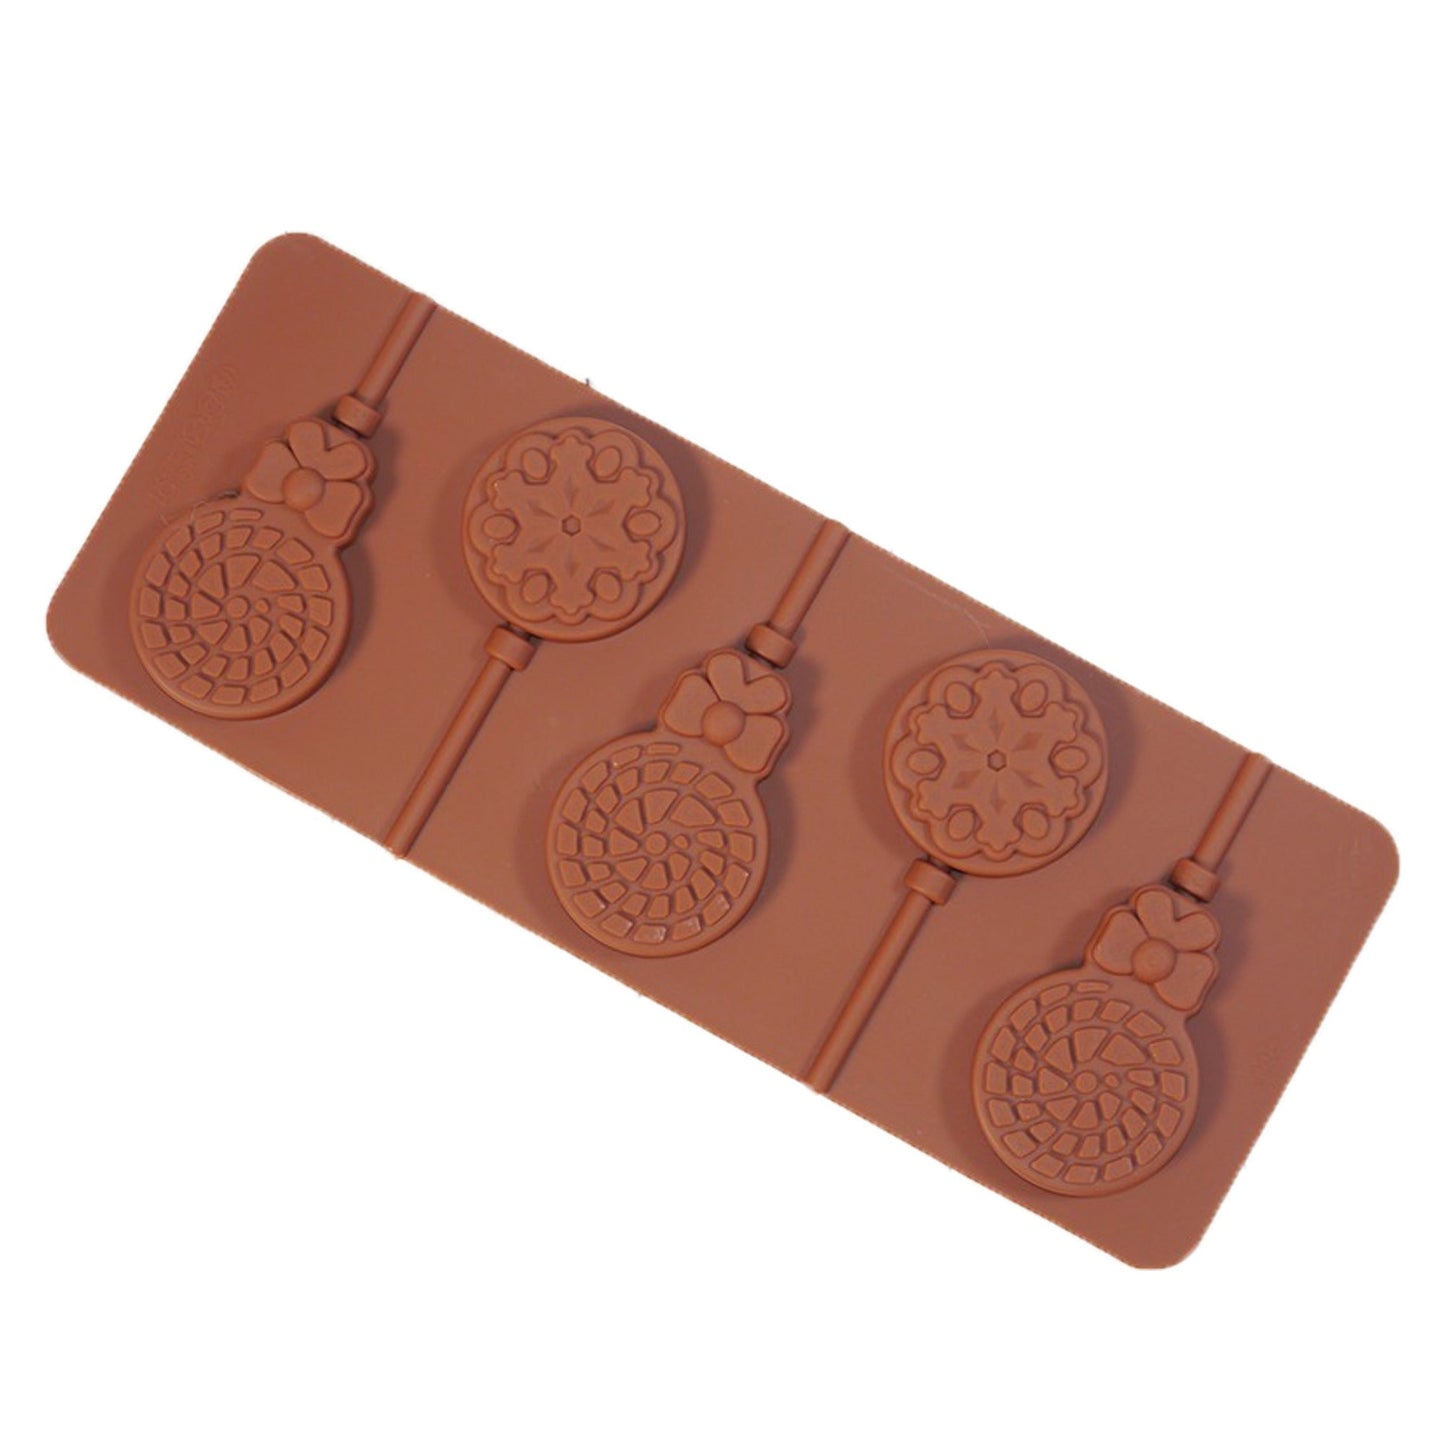 Biscuit Designs Lollipop Silicone Mold 5 Cavity